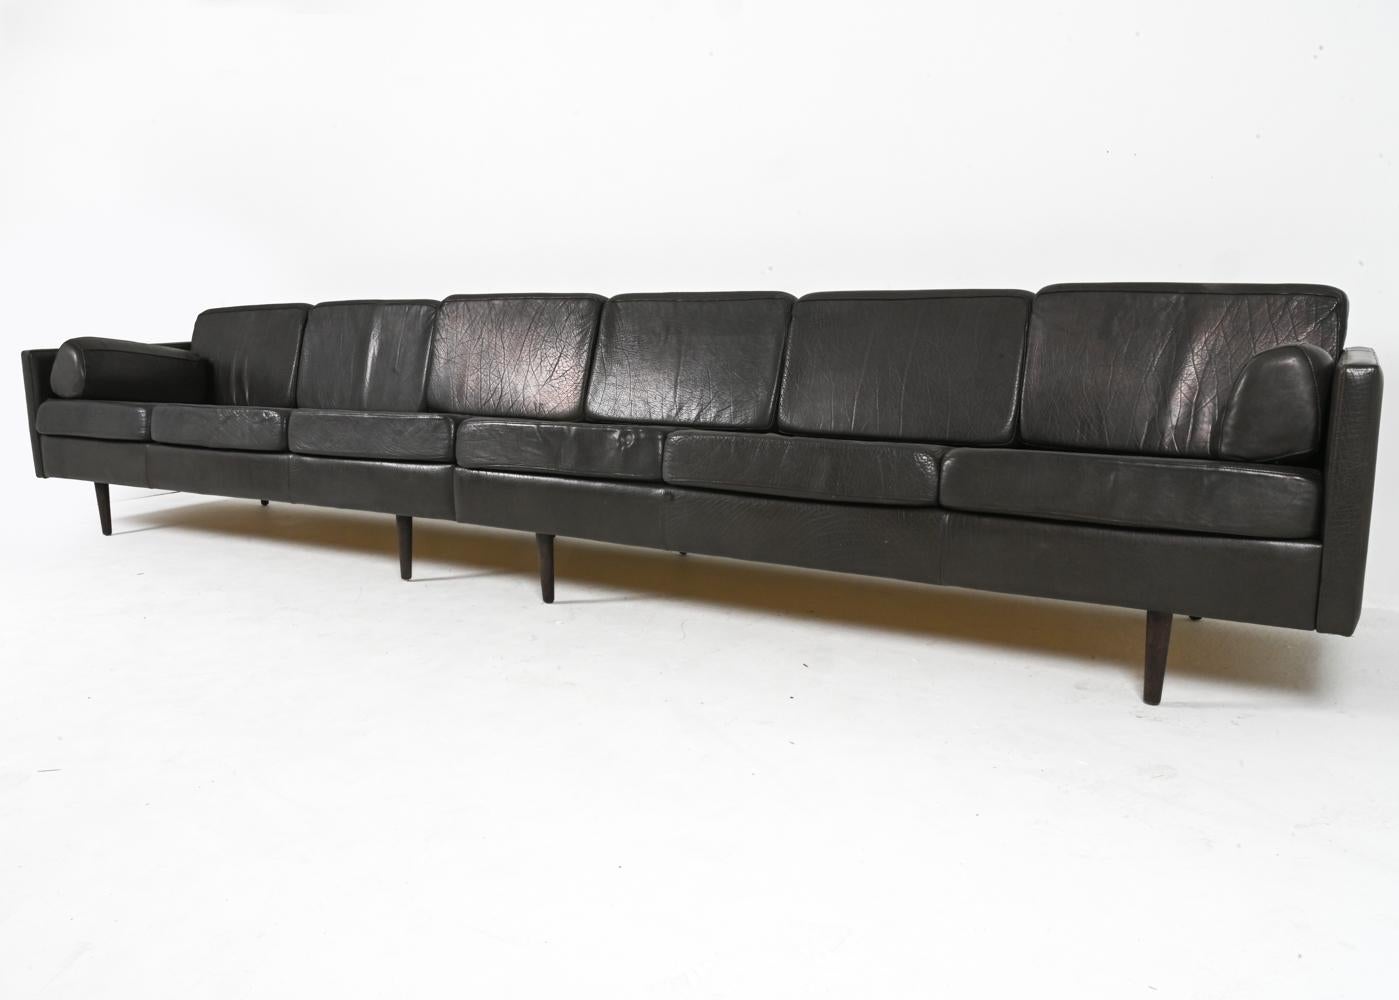 Monumental Danish Buffalo Leather & Oak Sofa, c. 1960's In Good Condition For Sale In Norwalk, CT